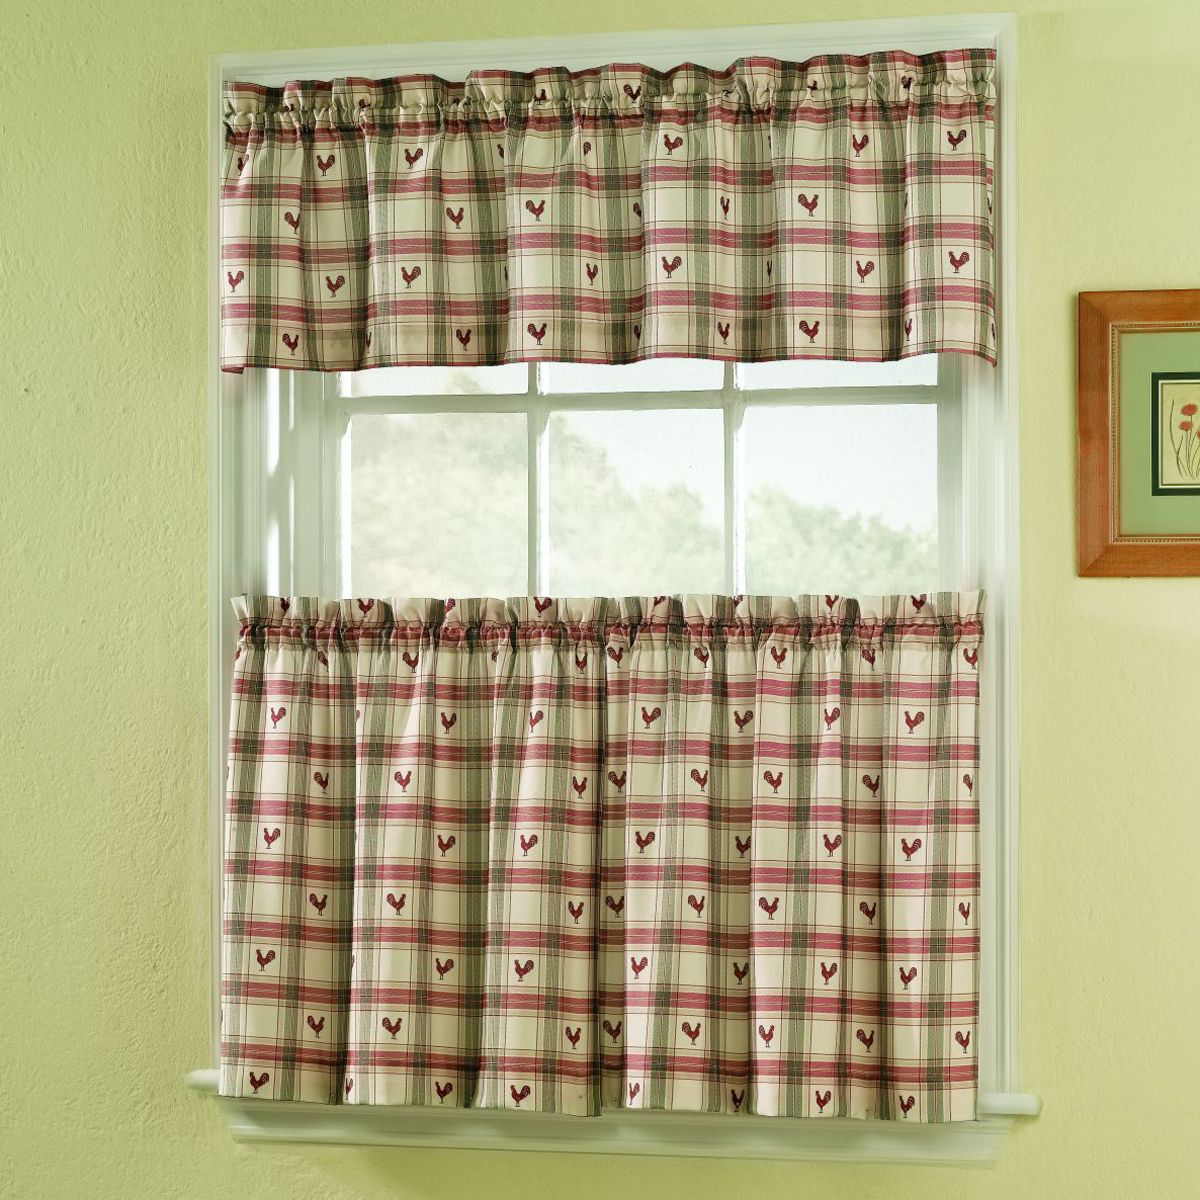 Colormate Rooster 56 in. x 14 in. Valance